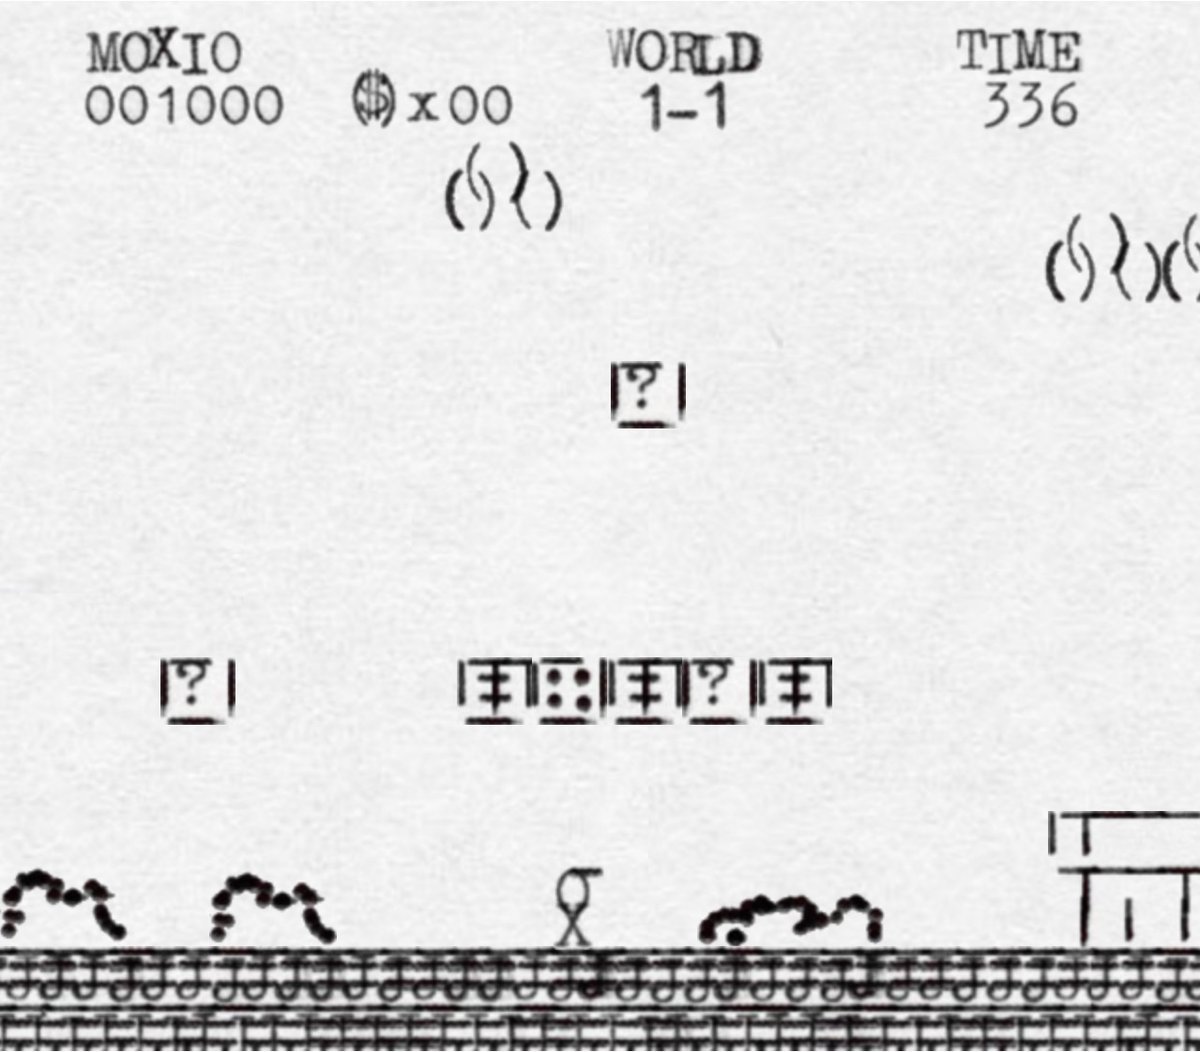 screenshot of a version of Super Mario Bros with art done entirely by typewriter characters